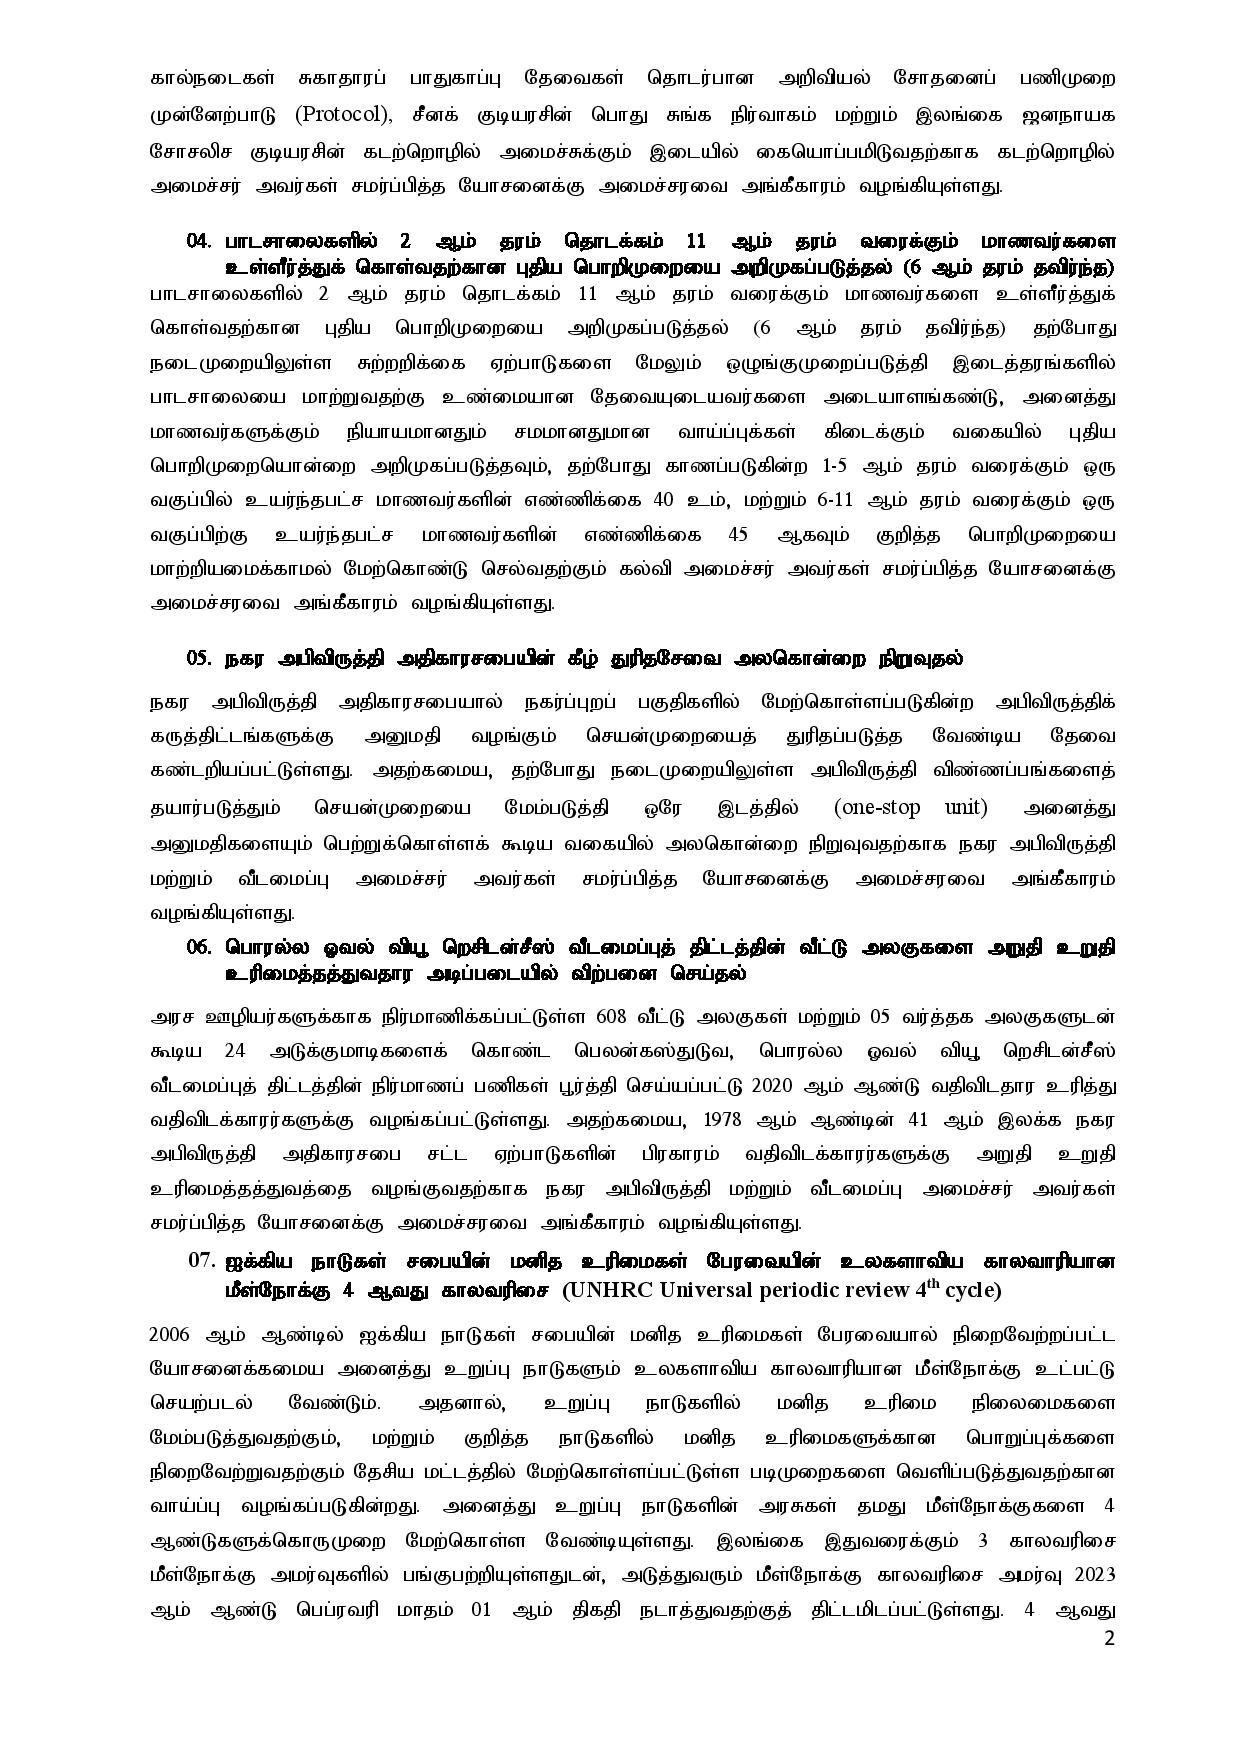 Cabinet Decisions on 02.01.2023 Tamil page 002